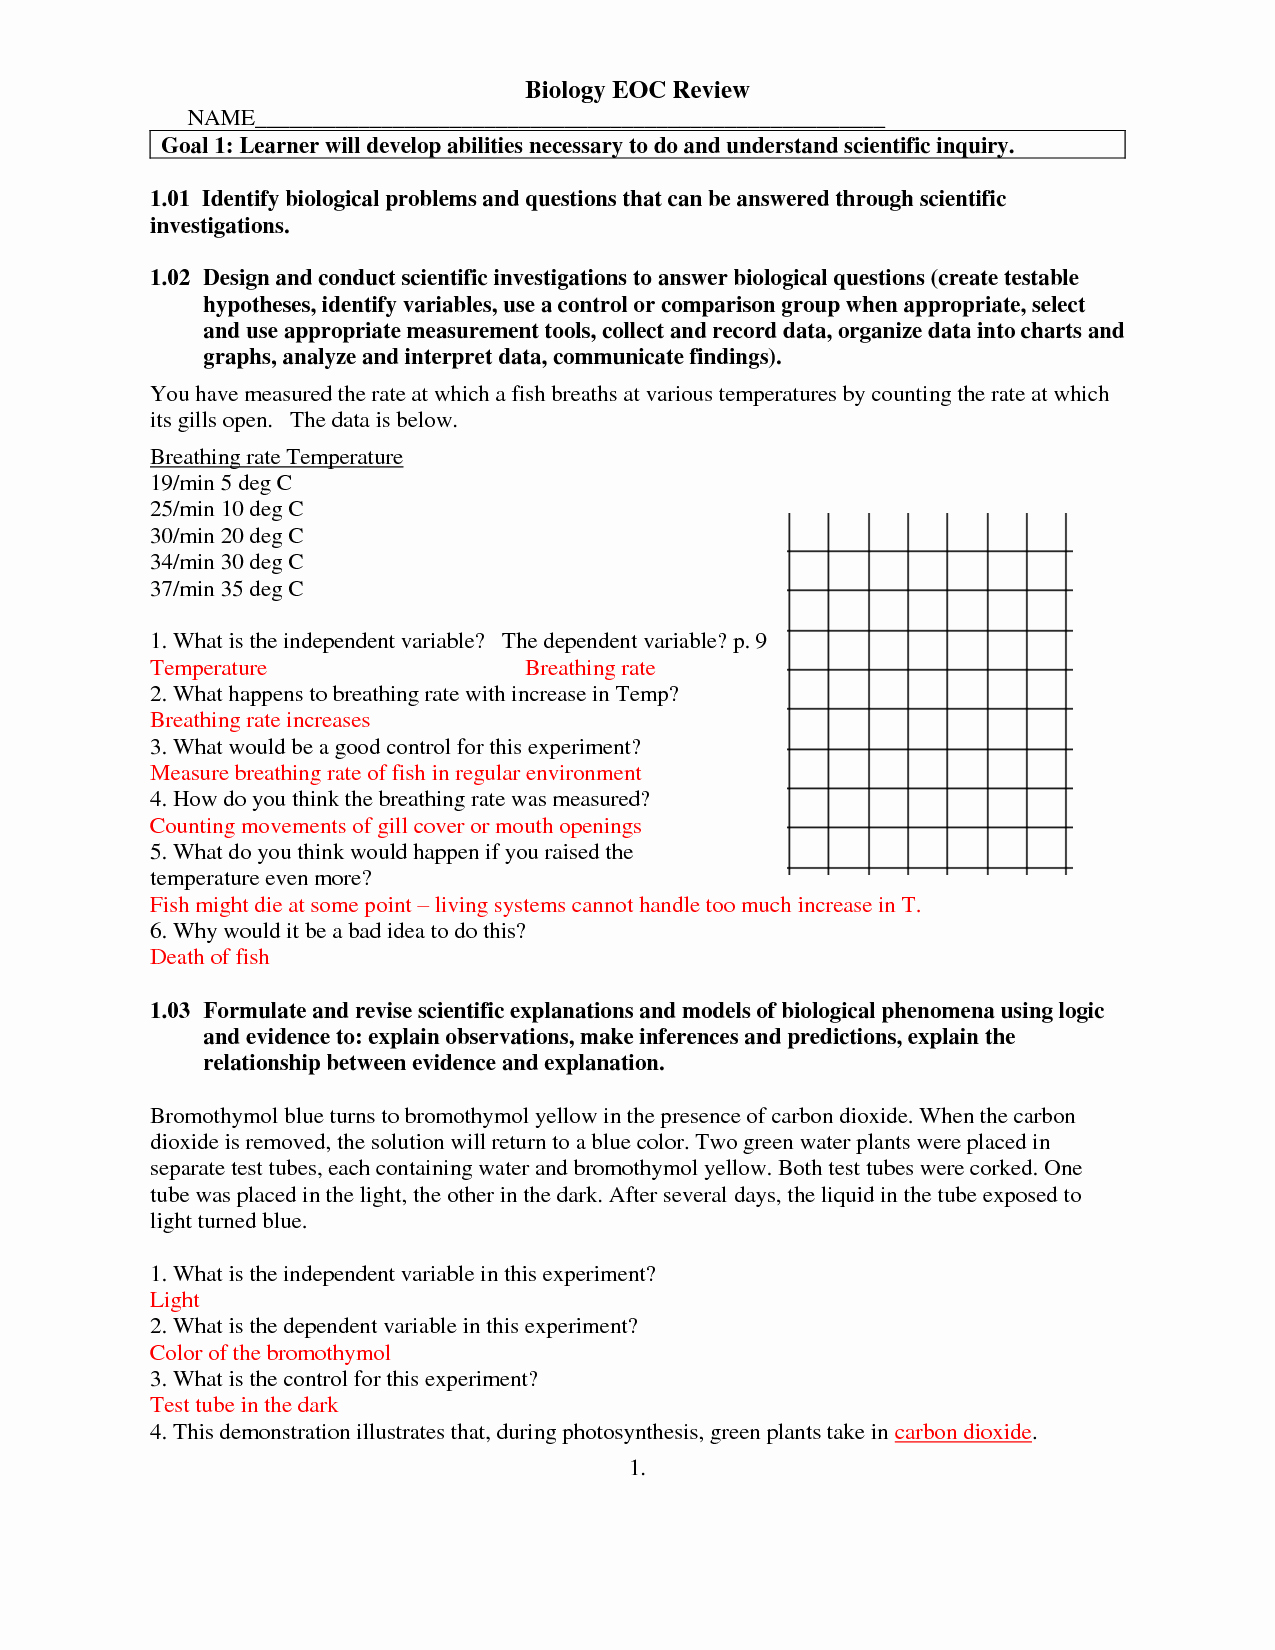 Protein Synthesis Worksheet Answer Key Unique Protein Synthesis Worksheet Answer Key